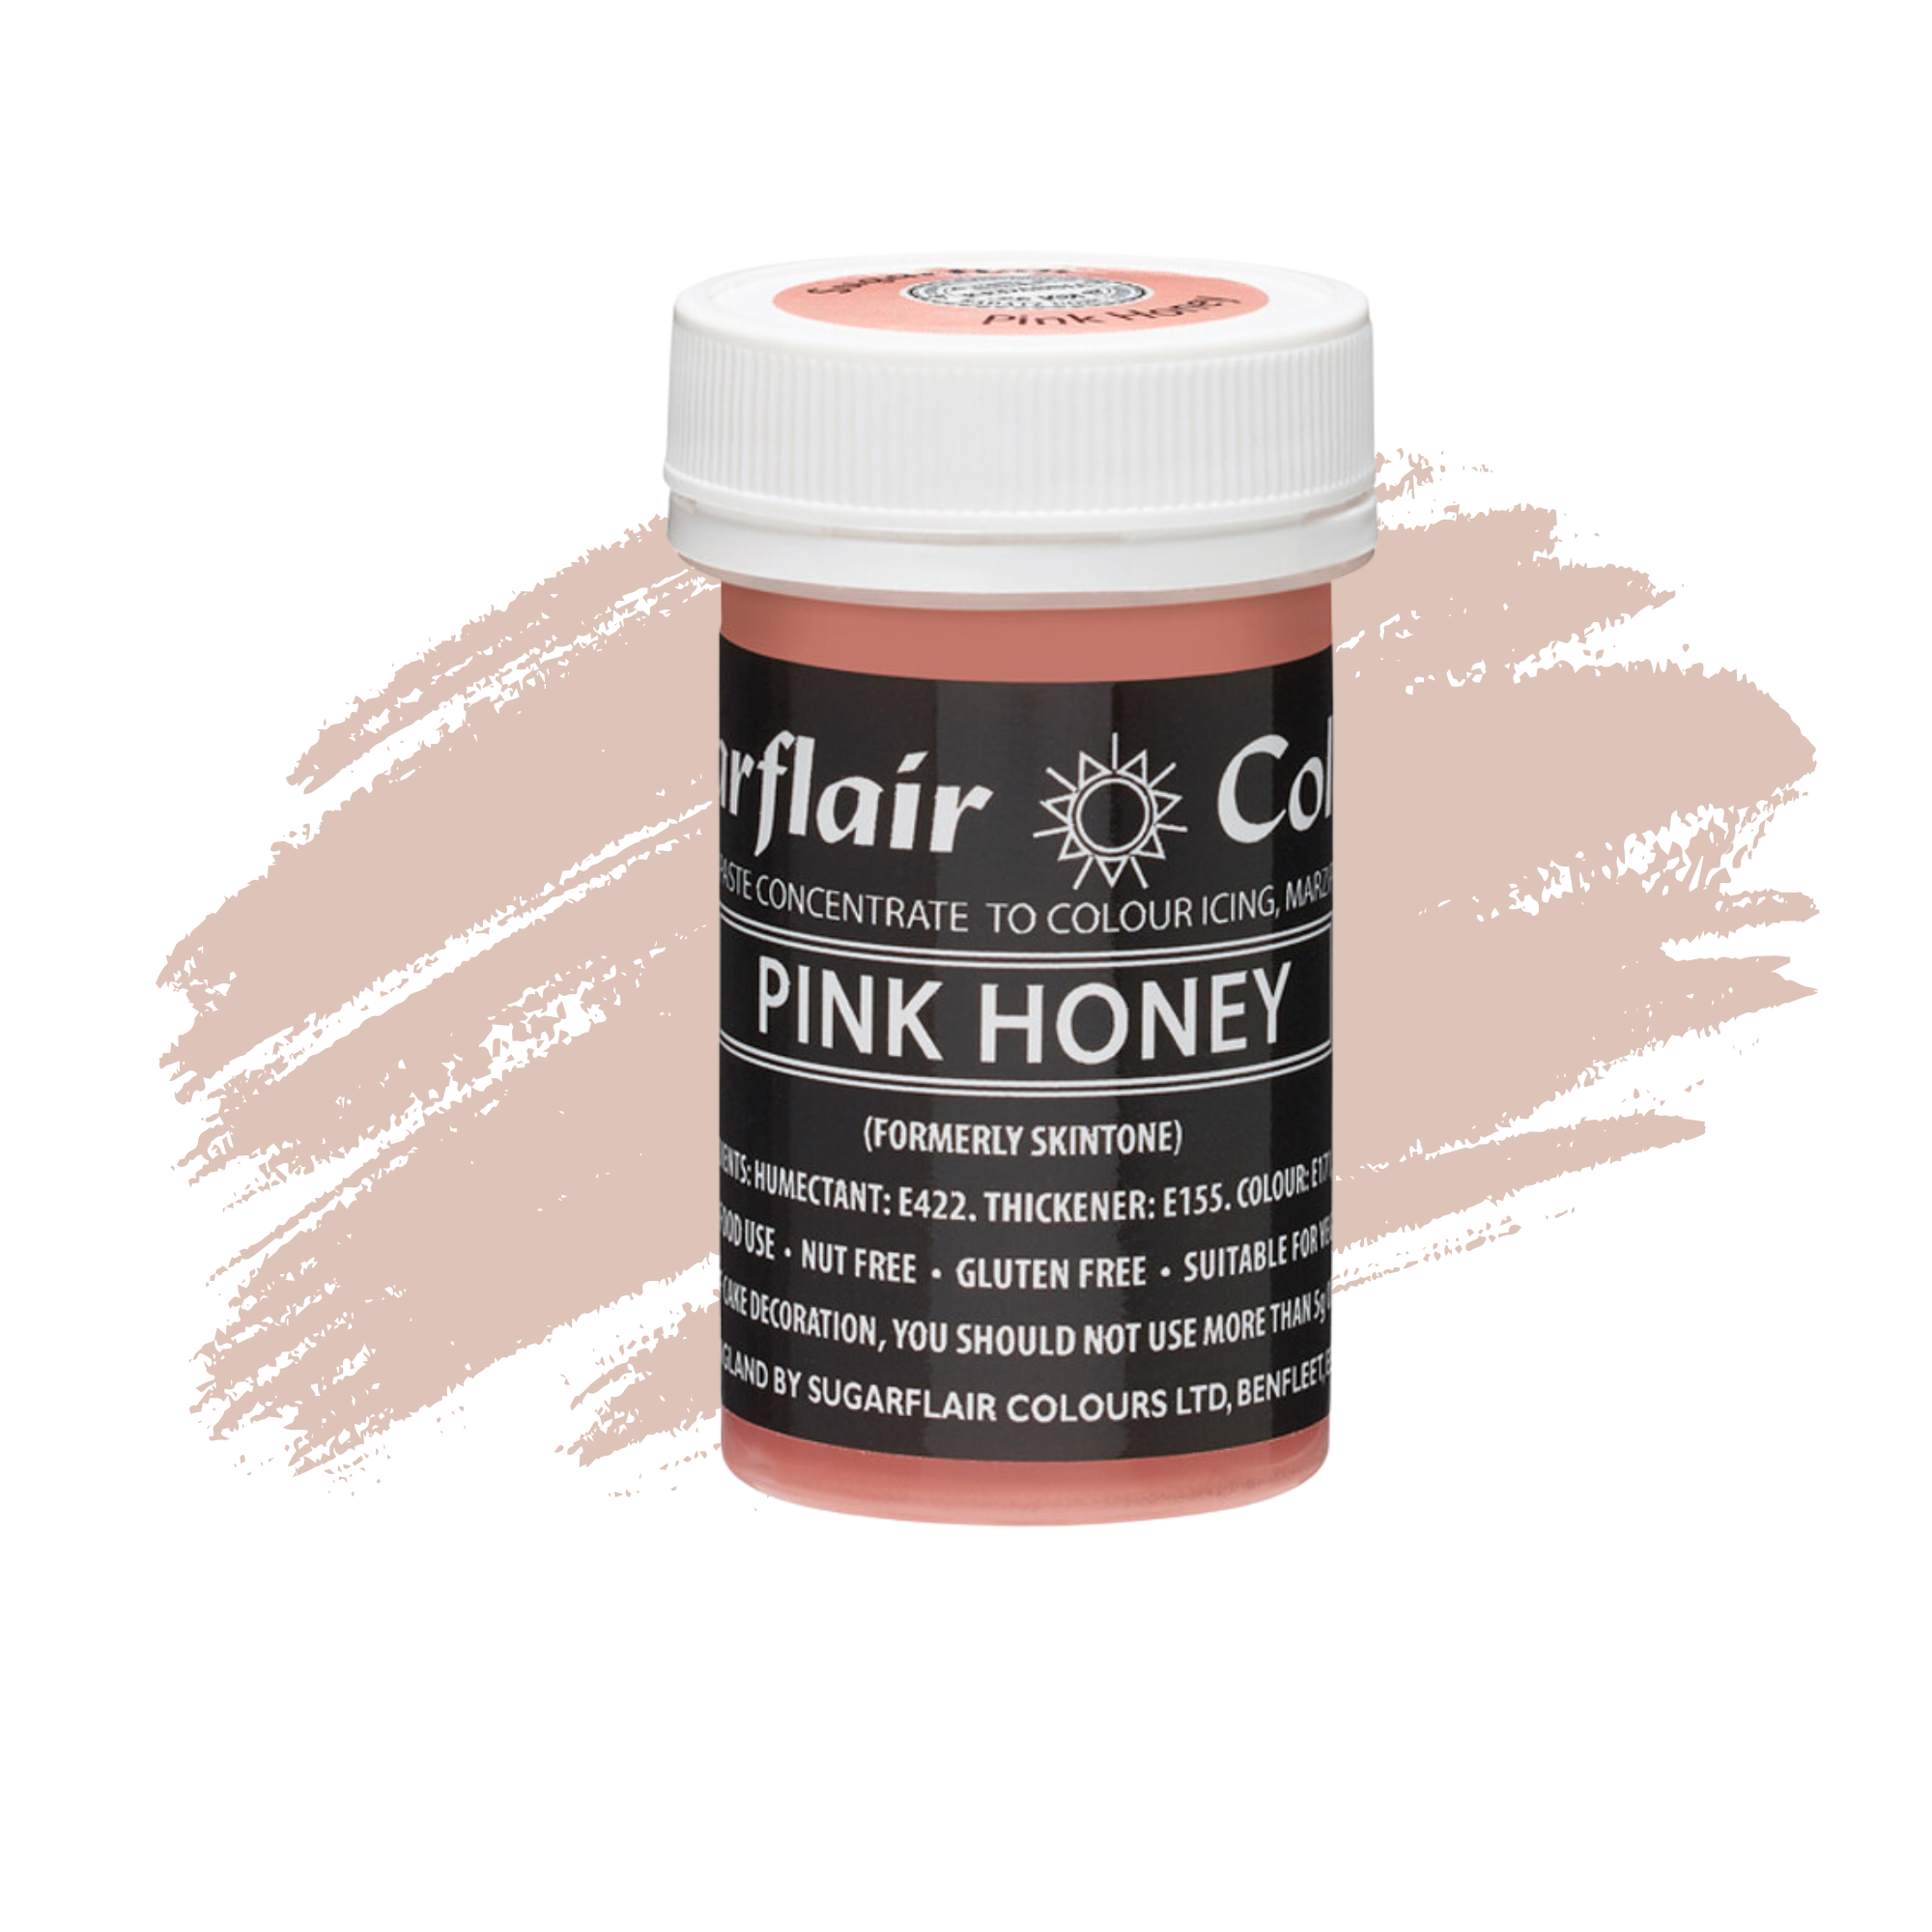 Sugarflair Paste Colours Concentrated Food Colouring - Pastel Pink Honey ( Formally Skintone ) - 25g